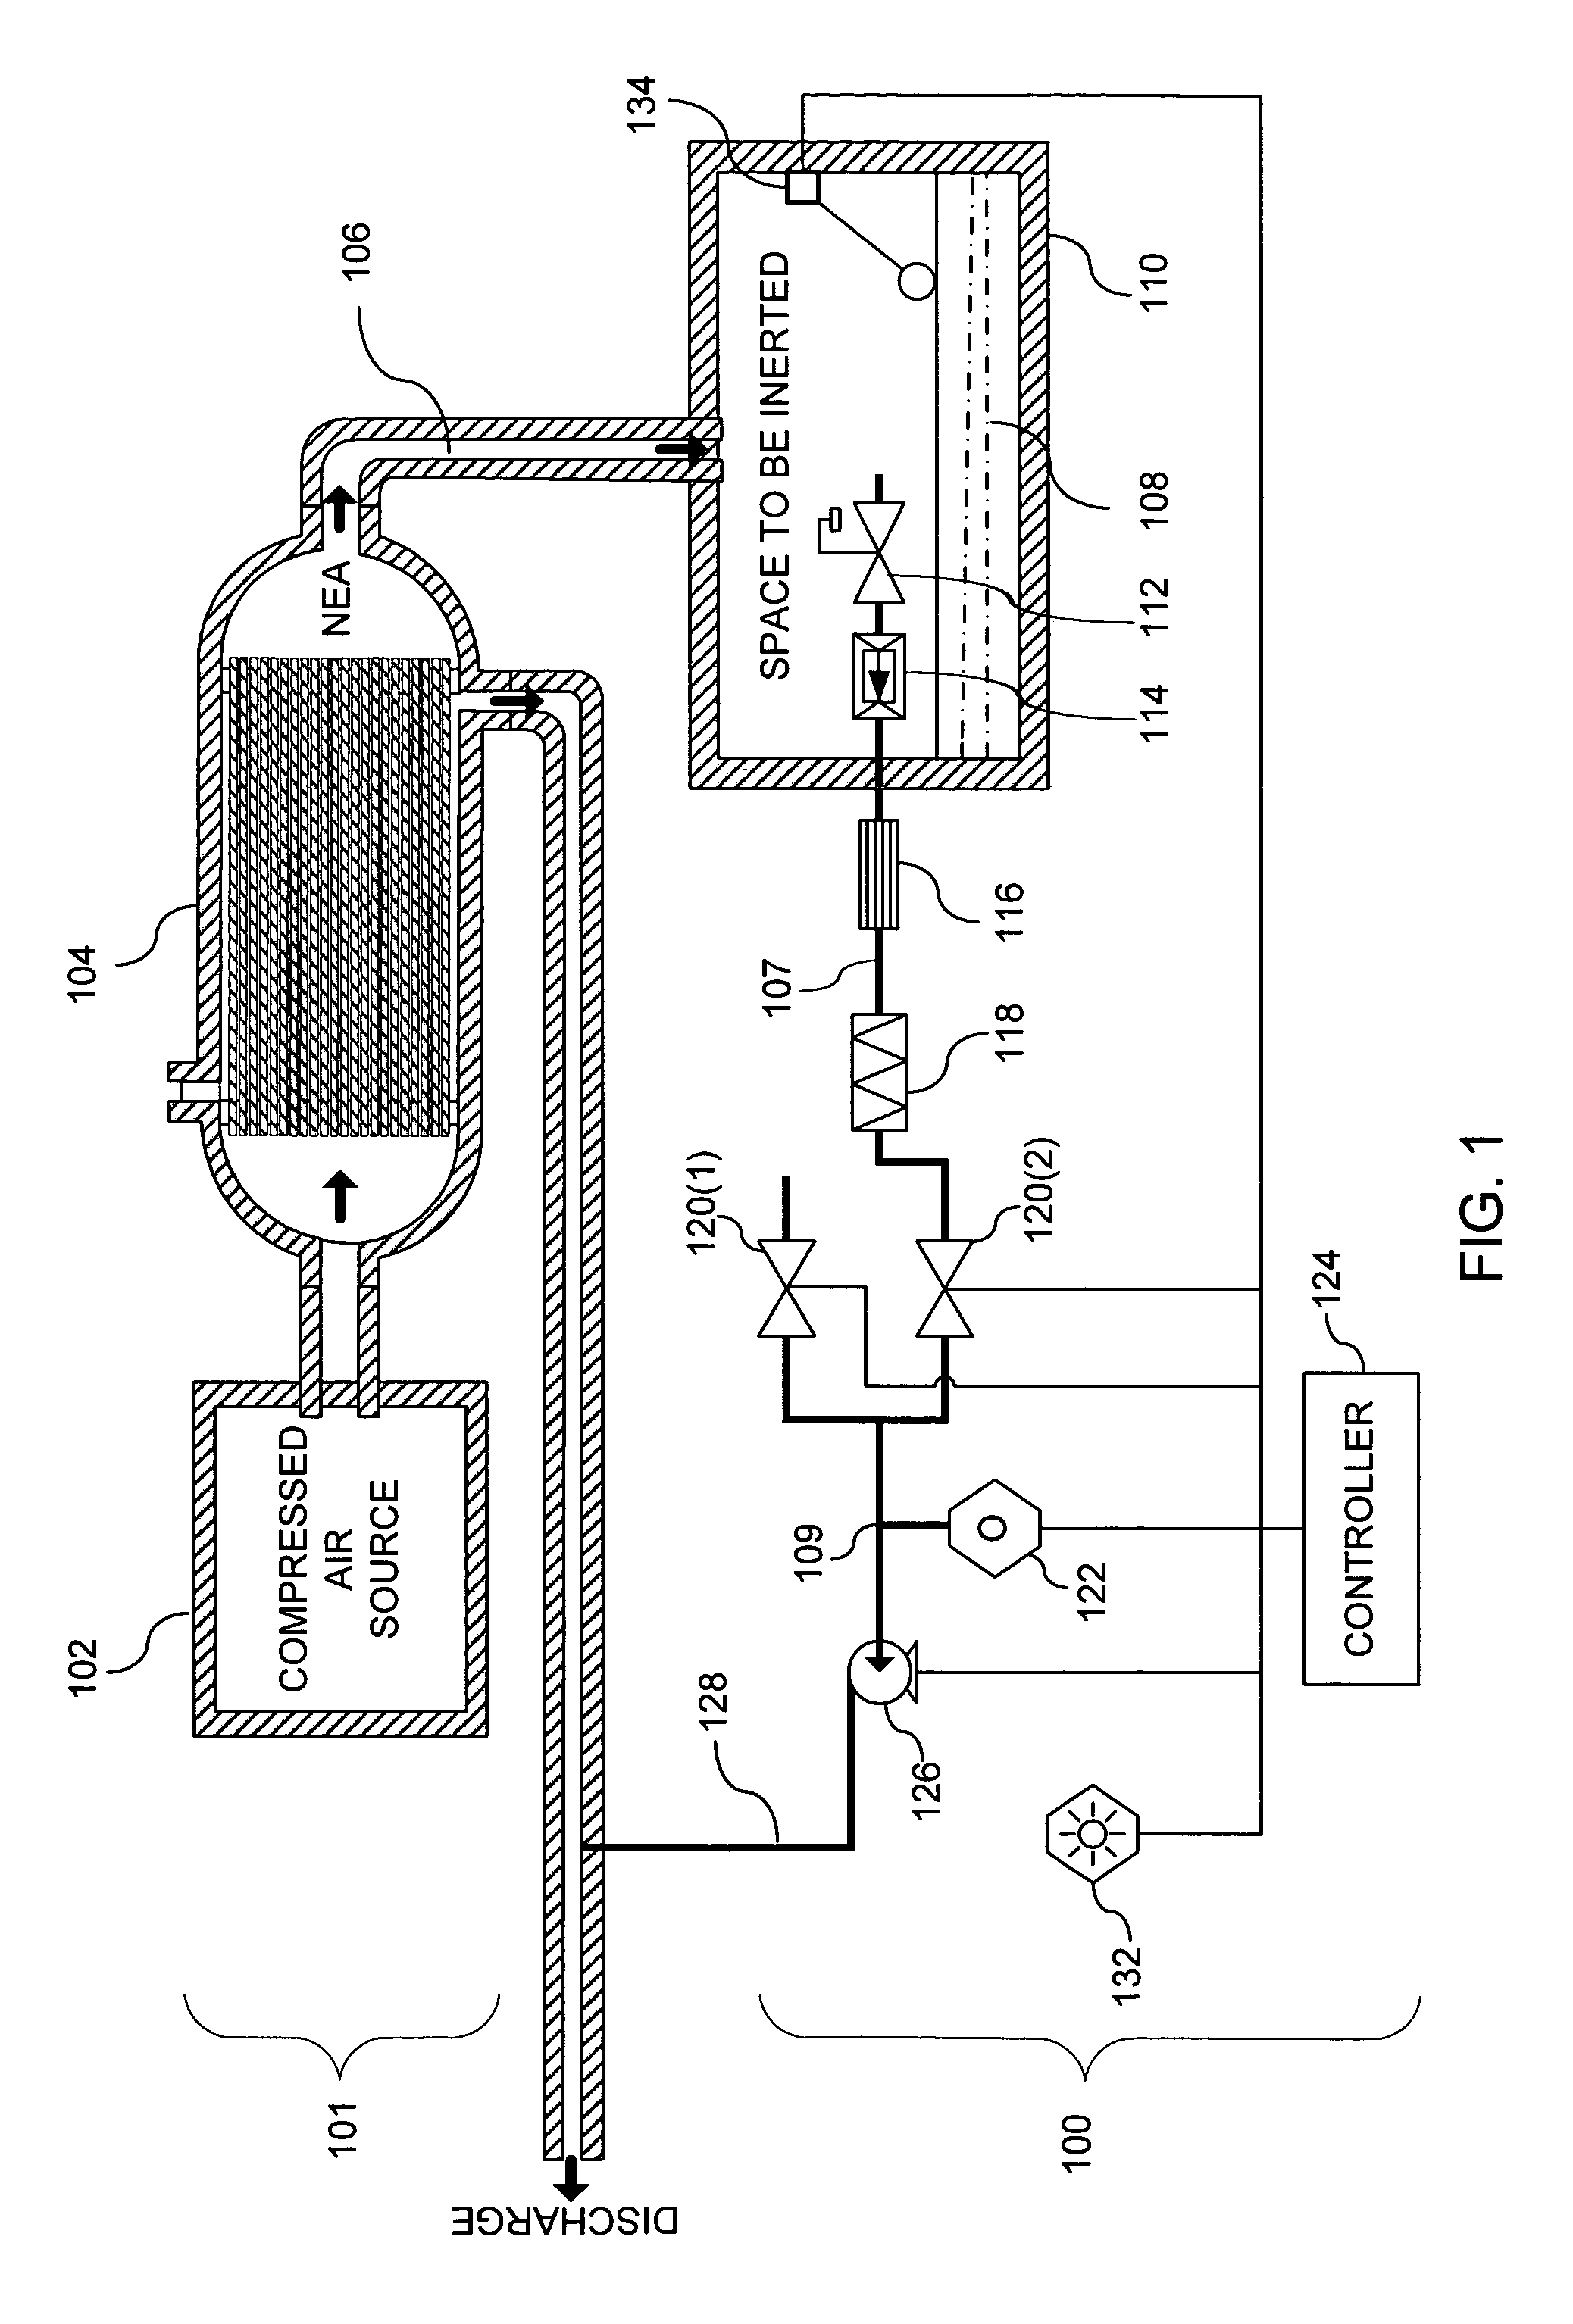 System and method for monitoring the performance of an inert gas distribution system